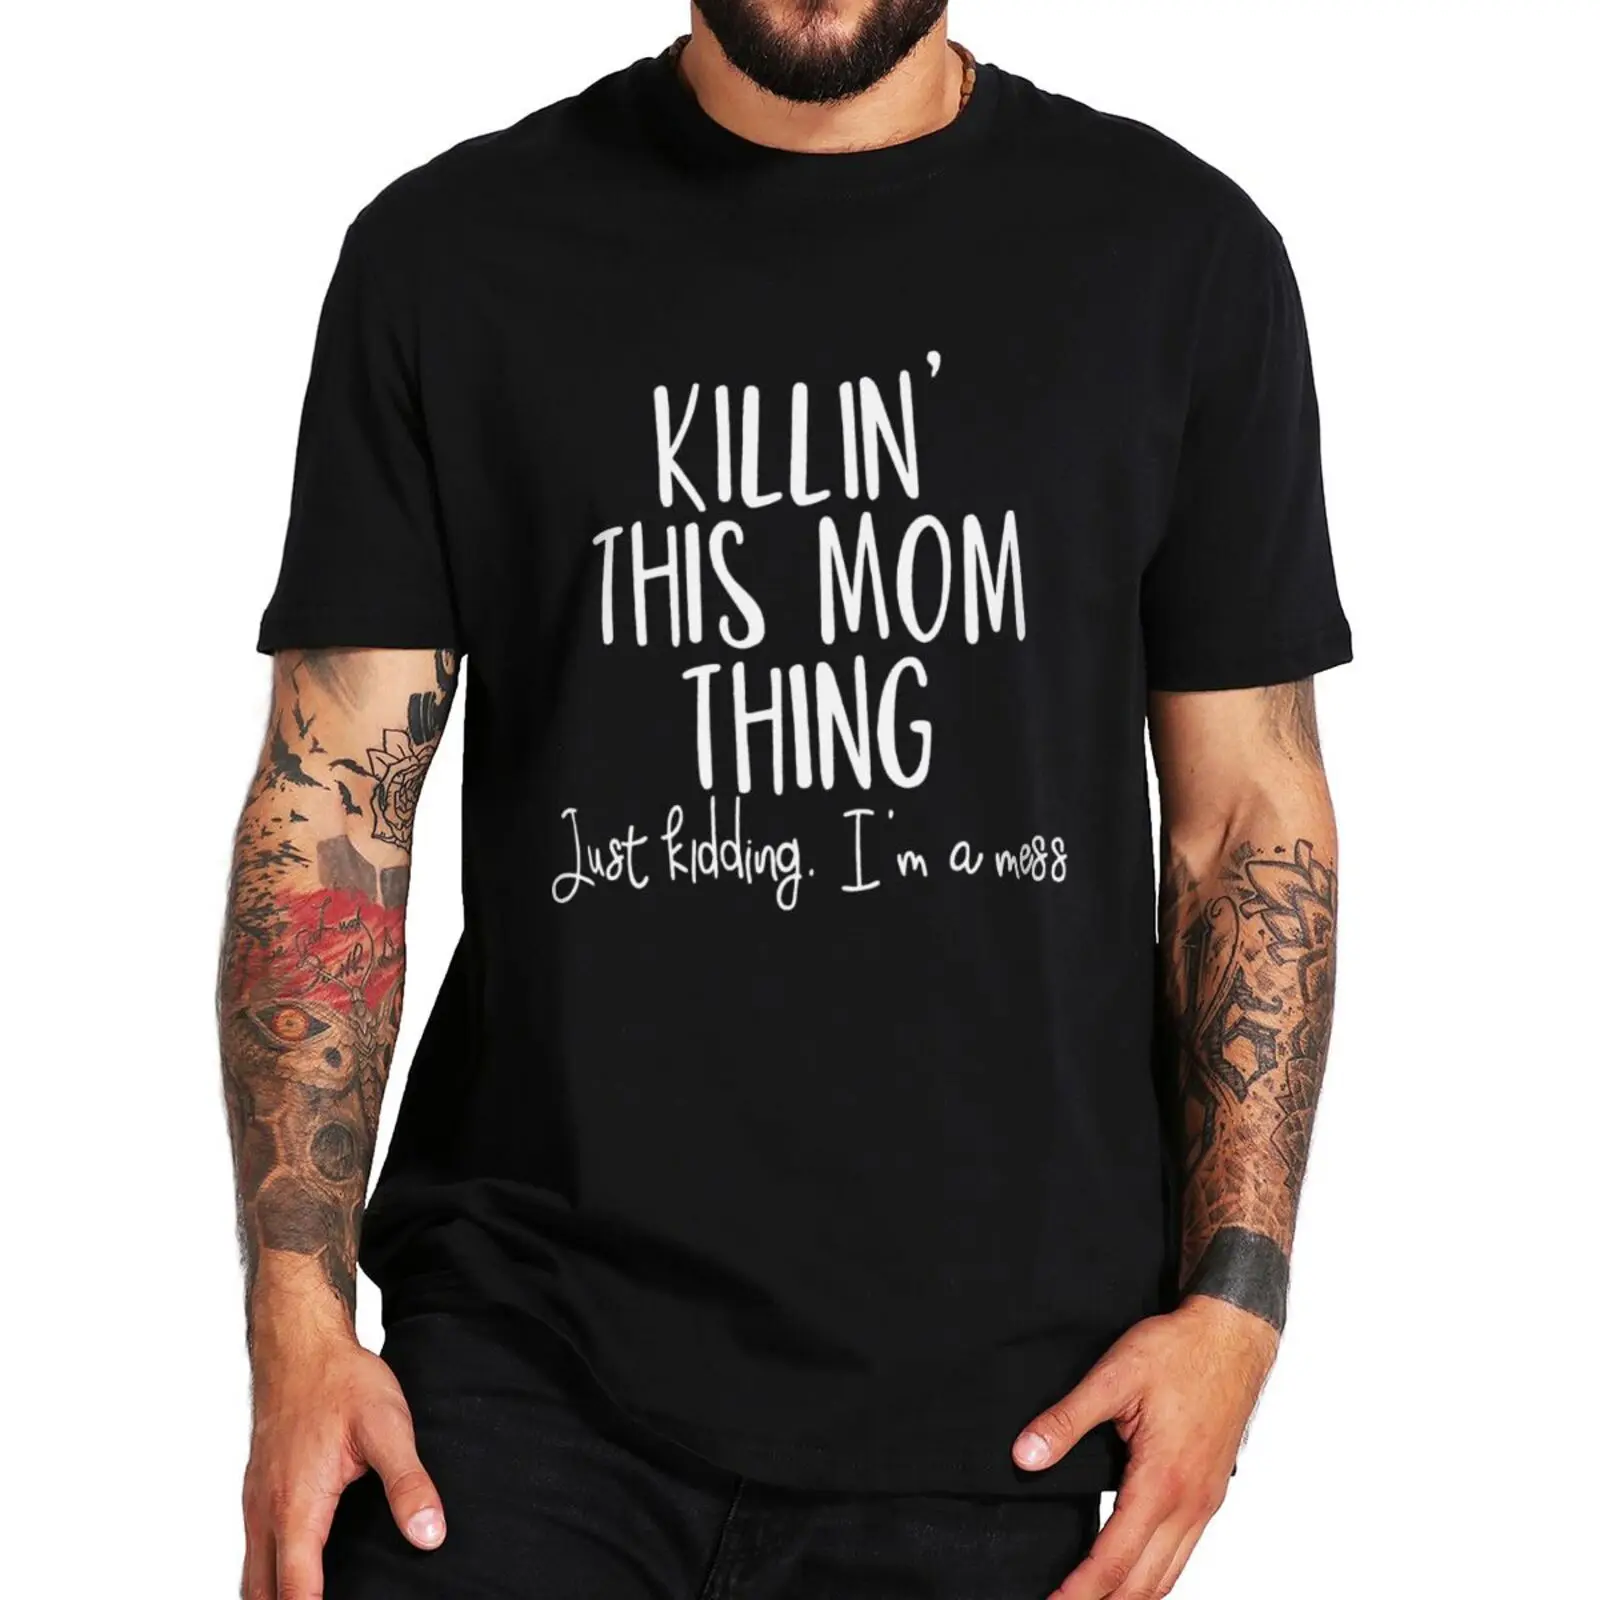 

Killin This Mom Thing Funny Jokes T Shirt Humor Slogan Gift Graphic Tee Tops Round Neck Cotton Summer Casual T-shirts